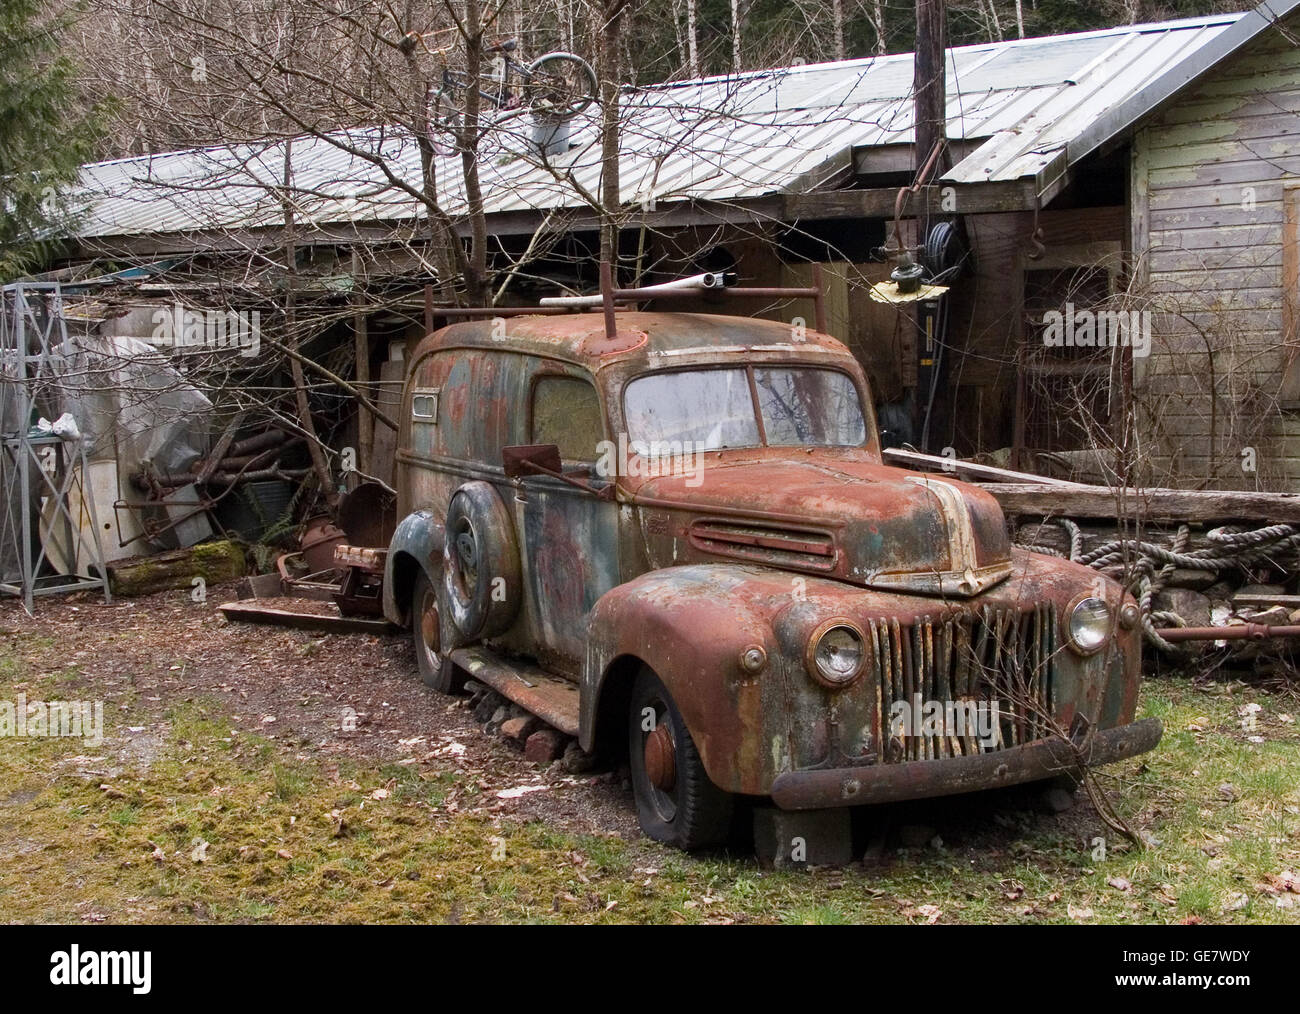 An abandoned Ford truck and deserted and dilapidated business-residence makes the subject for this nostalgic photo study. Stock Photo